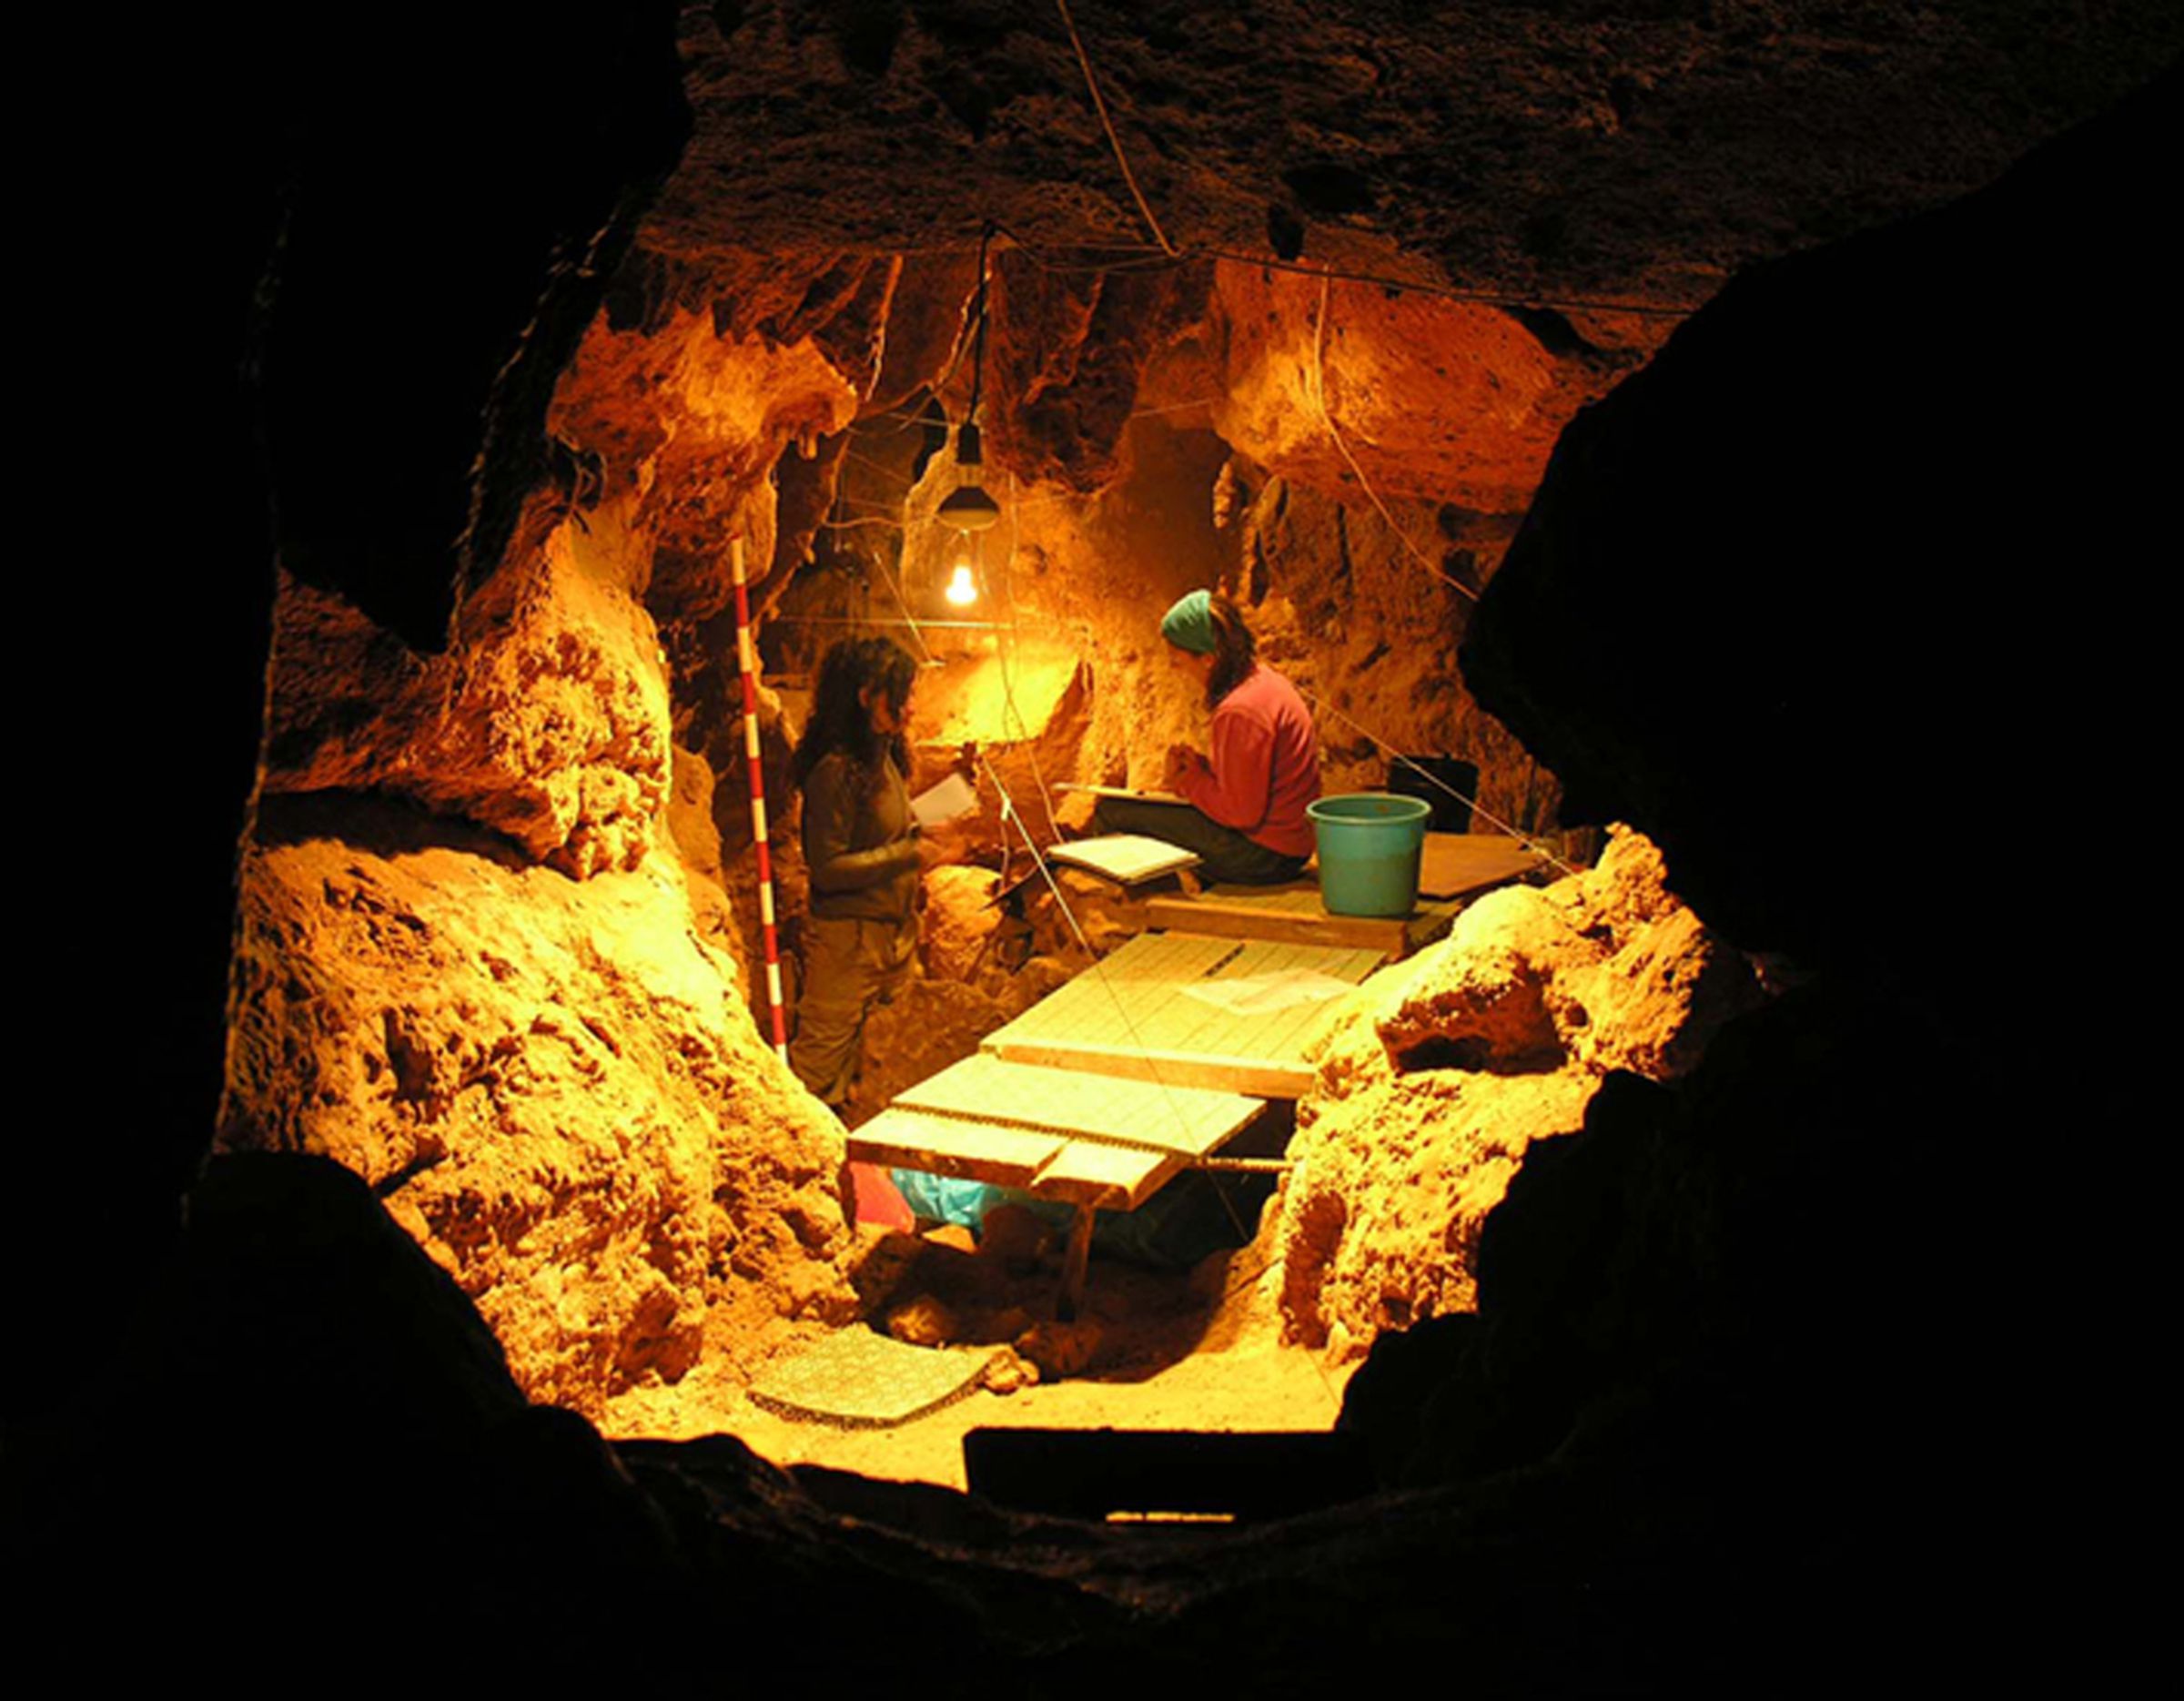 Working in the El Sidron cave in Spain, where 12 Neanderthal specimens dating around 49,000 years ago have been recovered.